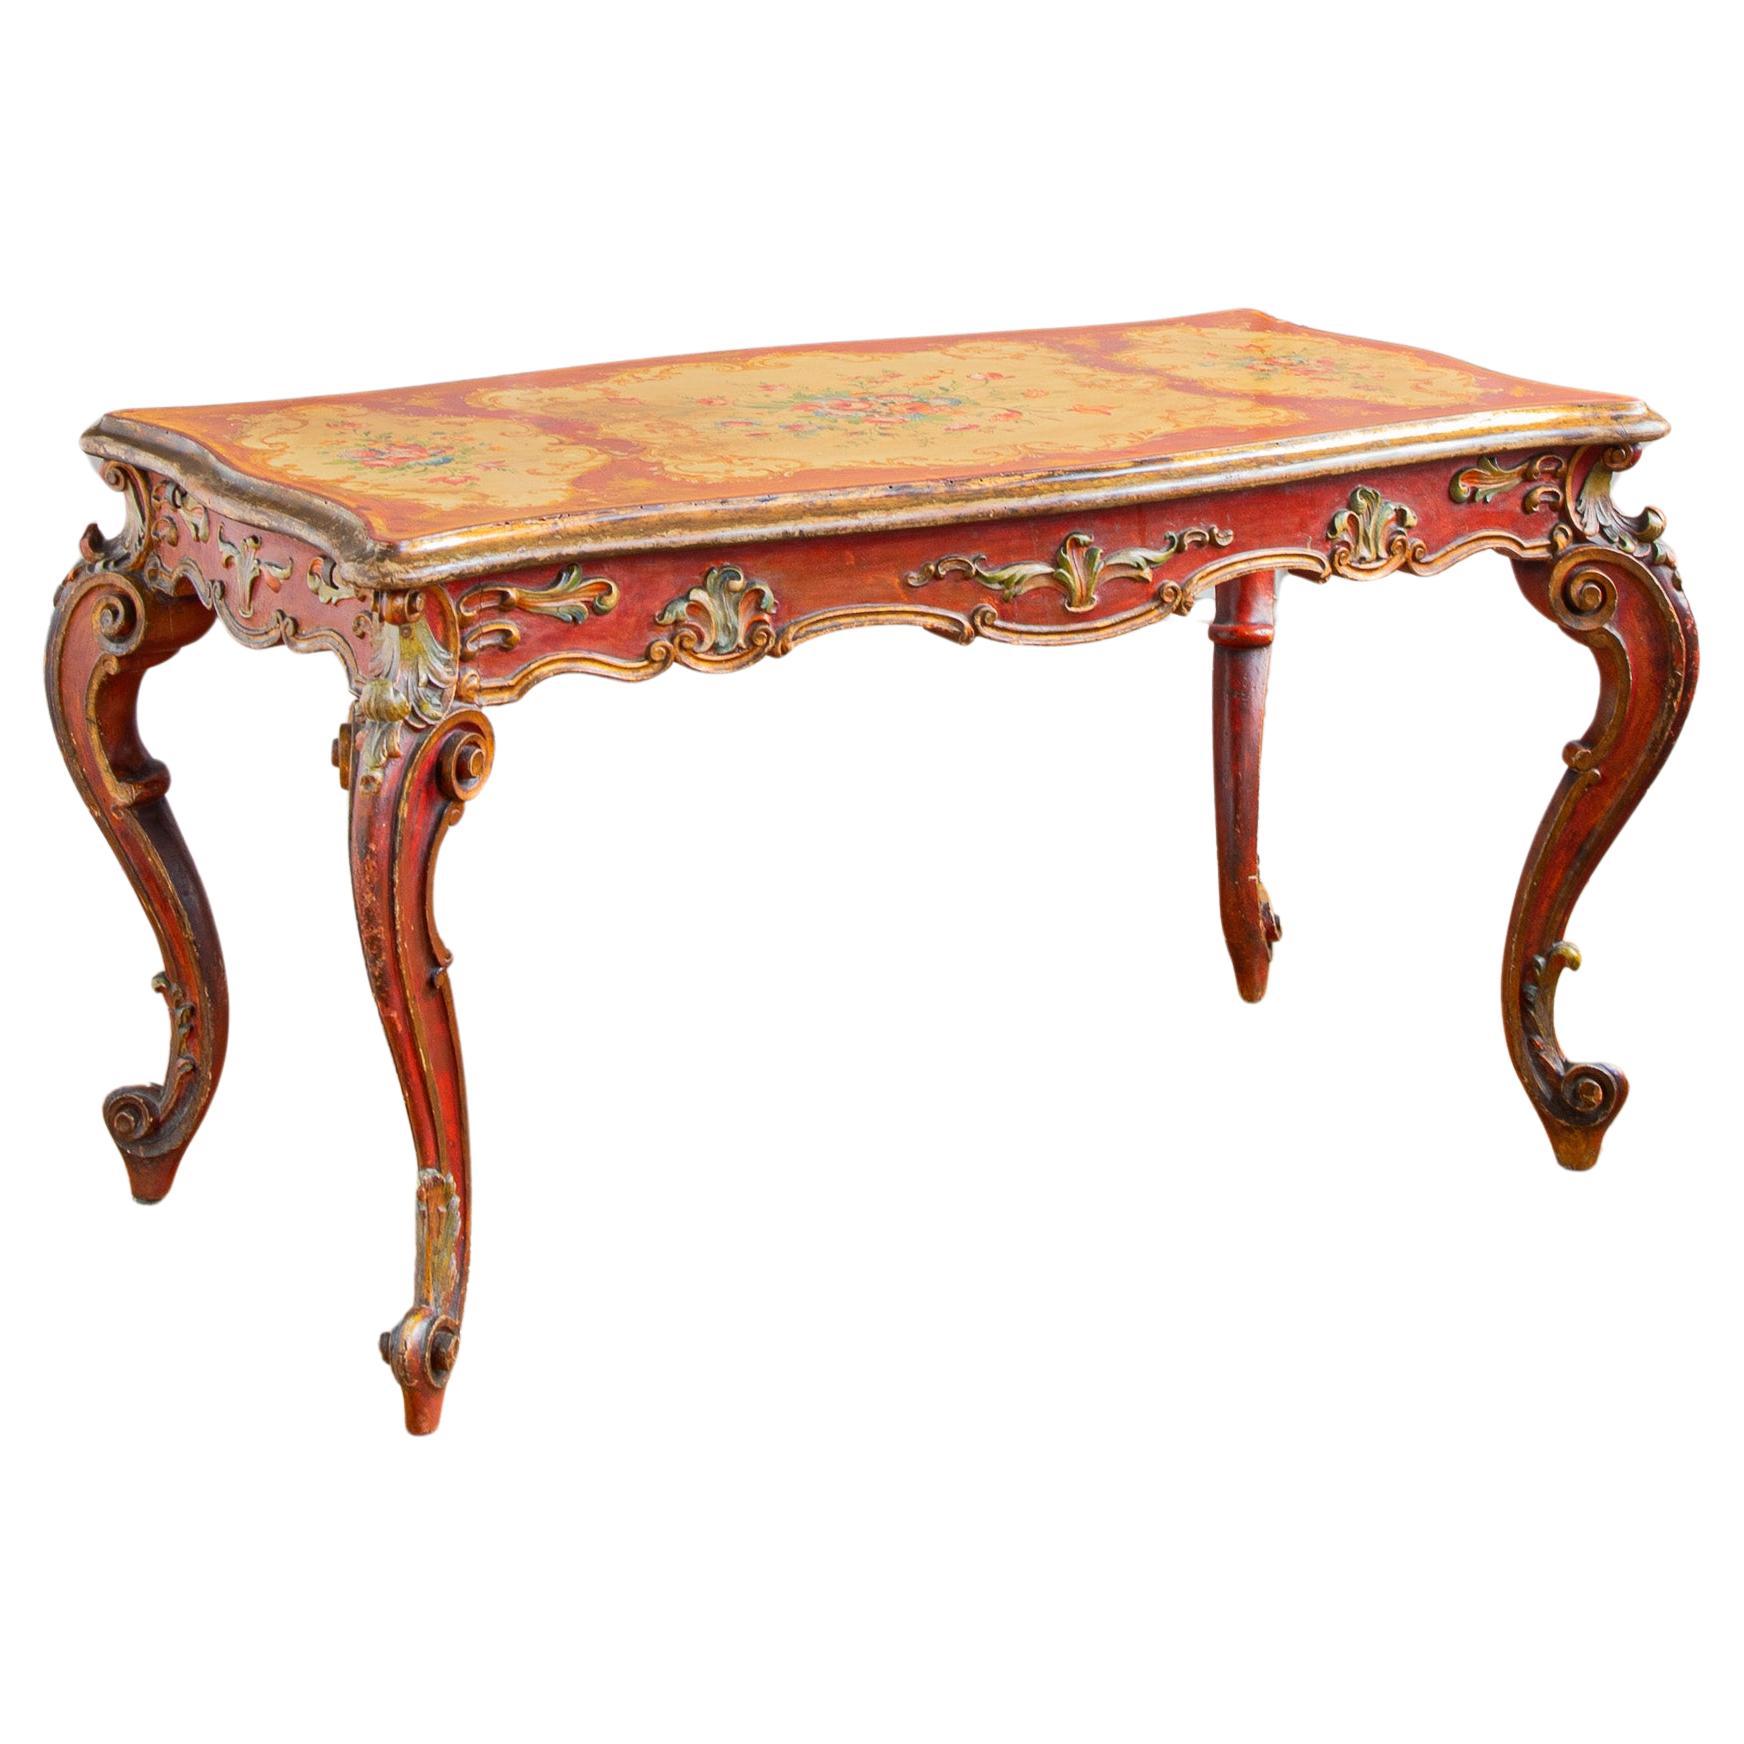  19th Century Italian Rococo Table Painted In The Venetian Style For Sale